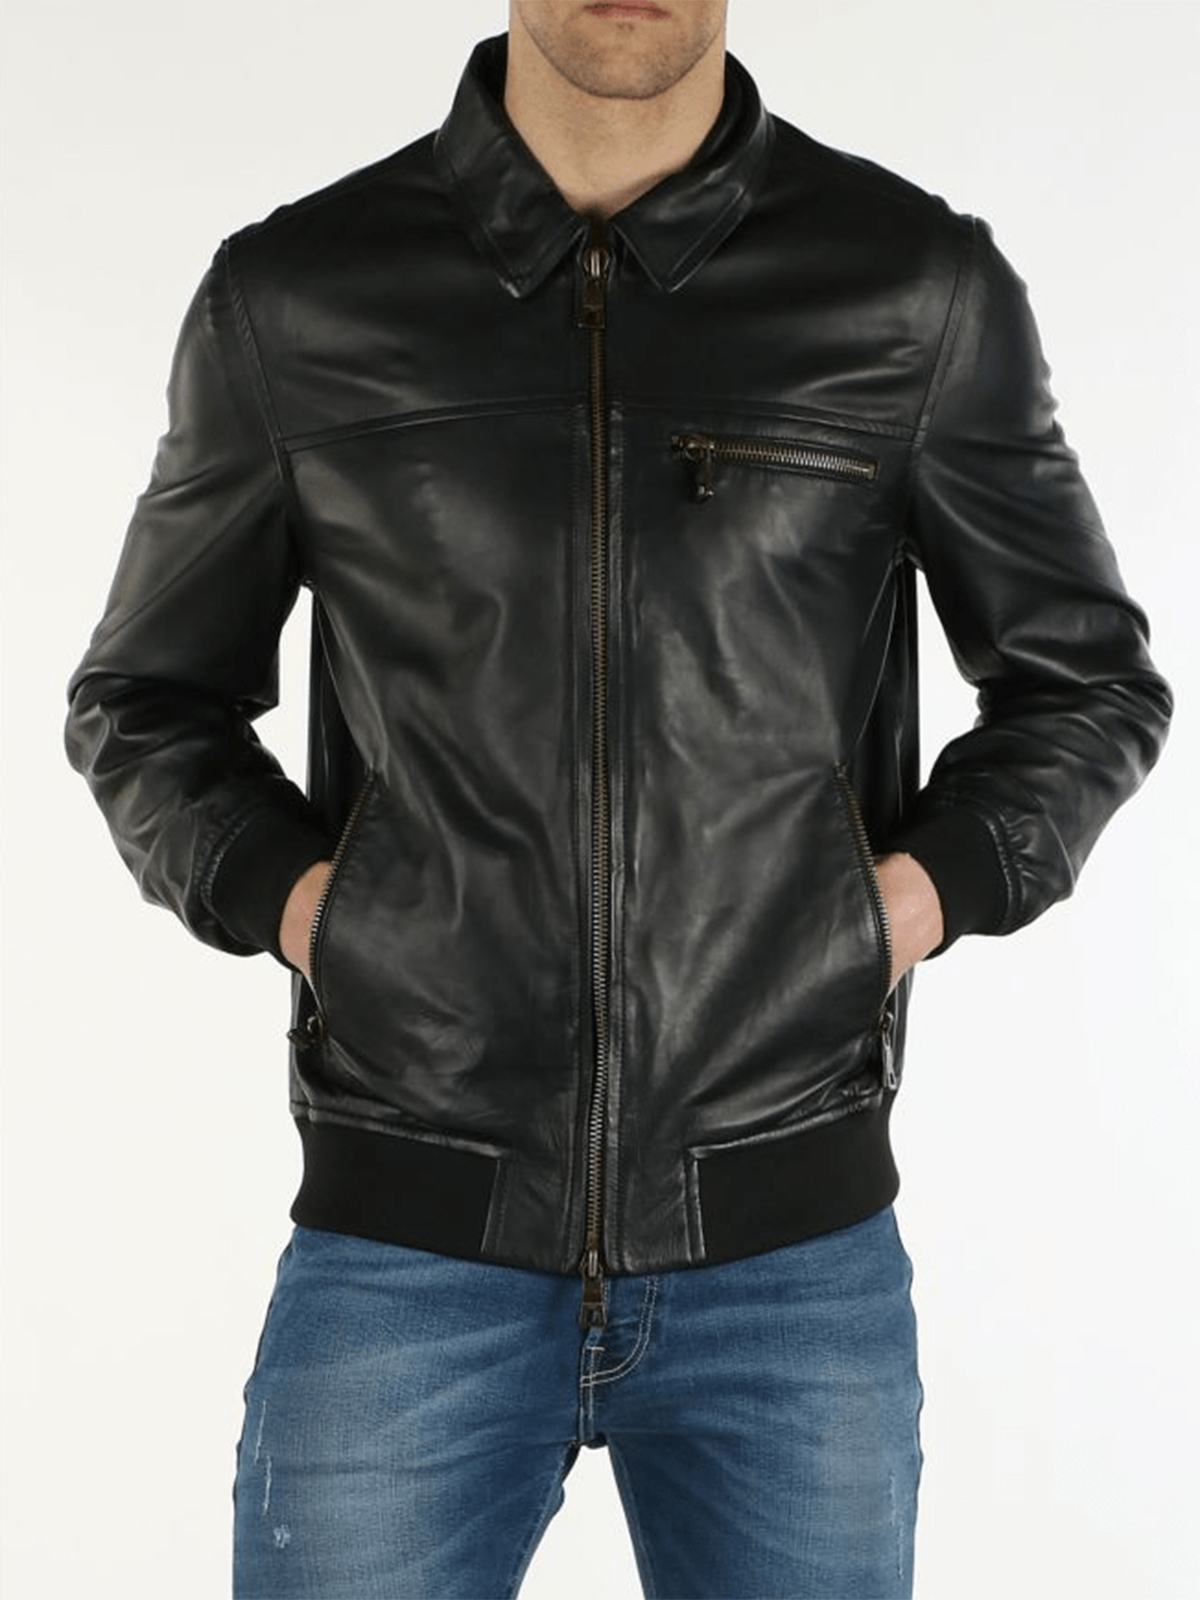 Guess Marciano Black Leather Jacket - Stars Jackets